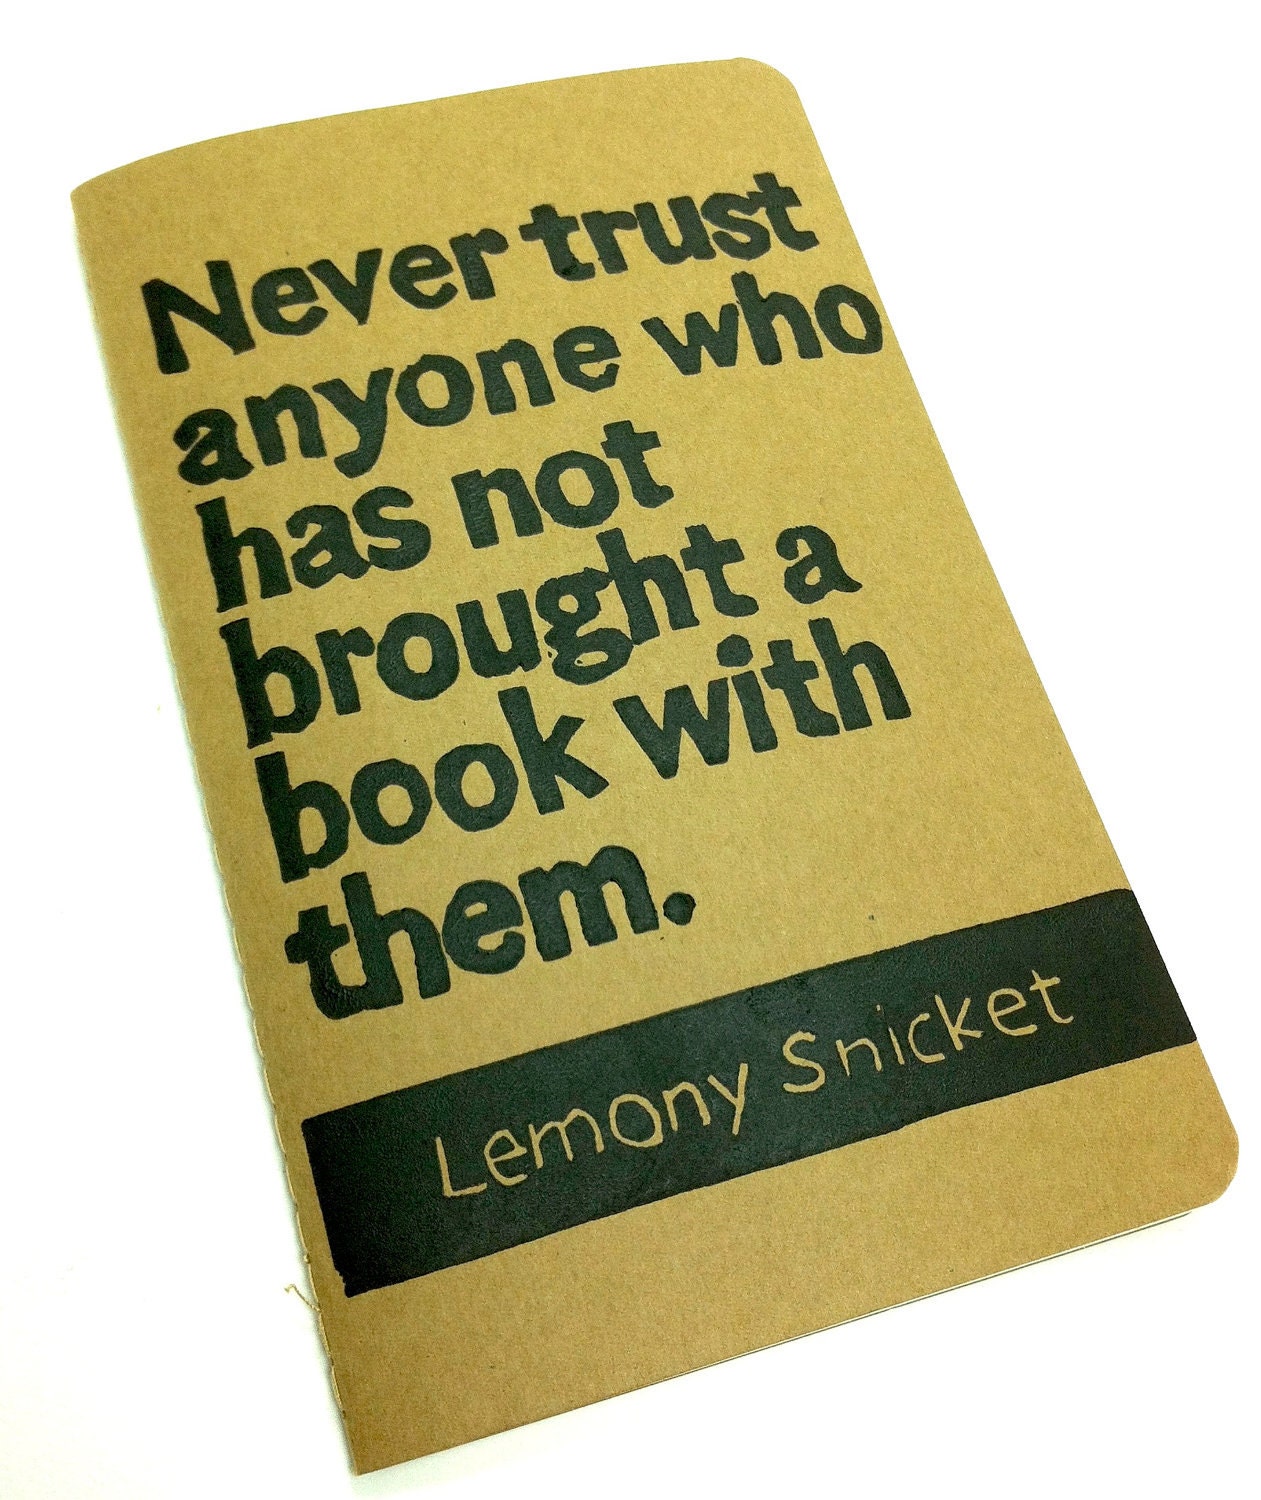 JOURNAL with Lemony Snicket Quote - Never Trust Anyone Who Has Not Brought A Book